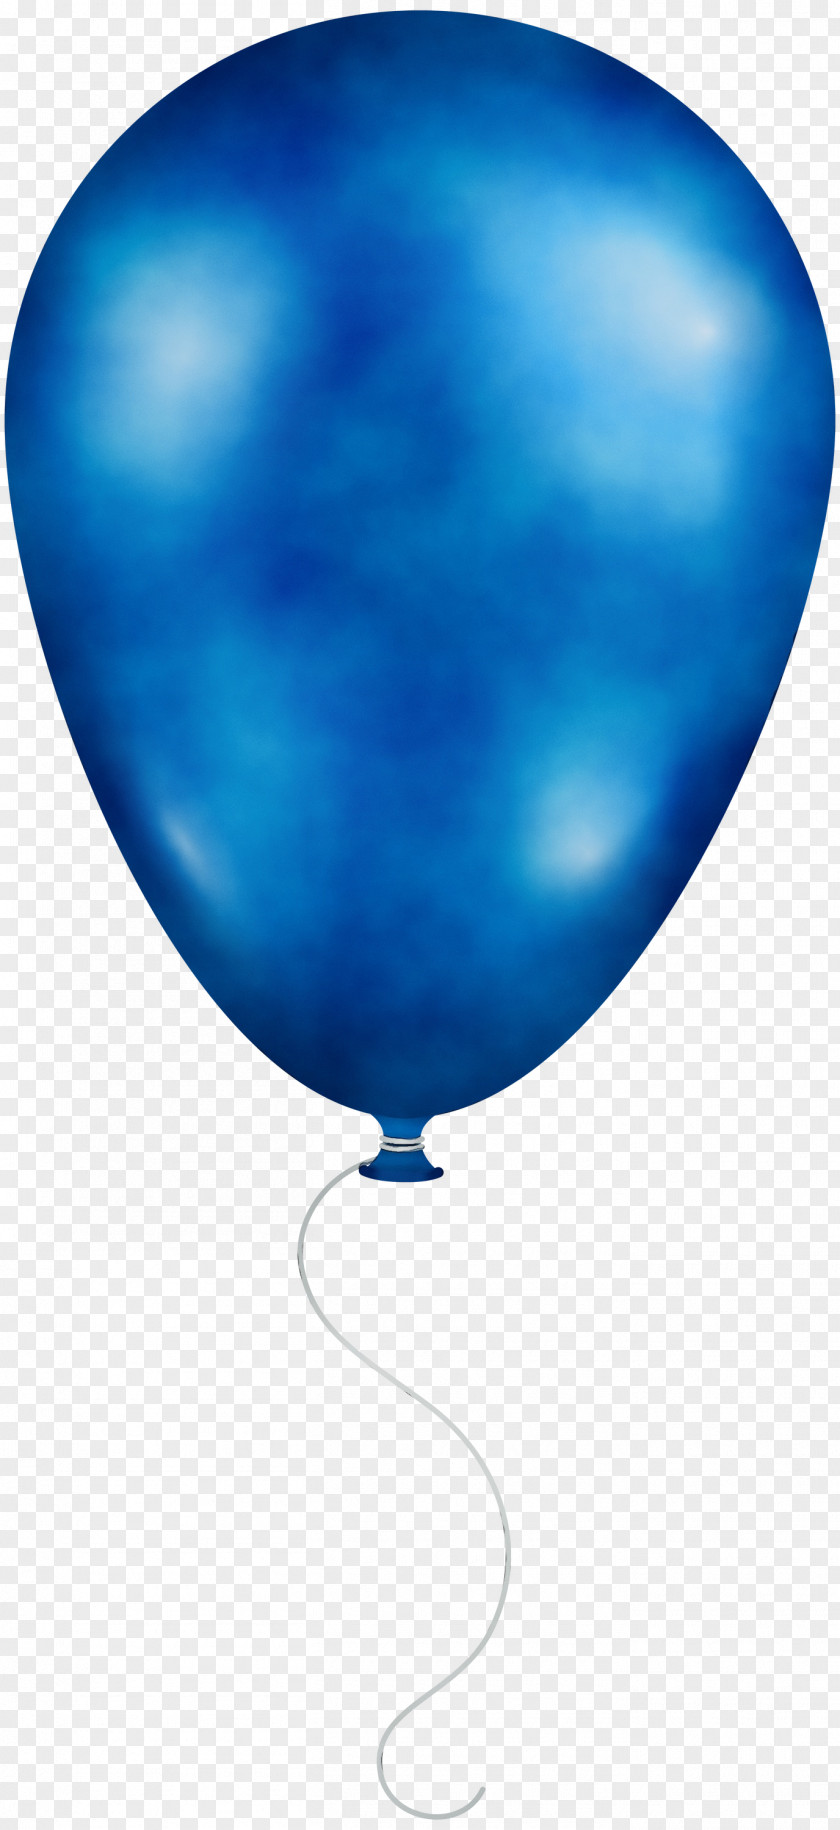 Toy Hot Air Balloon Watercolor PNG